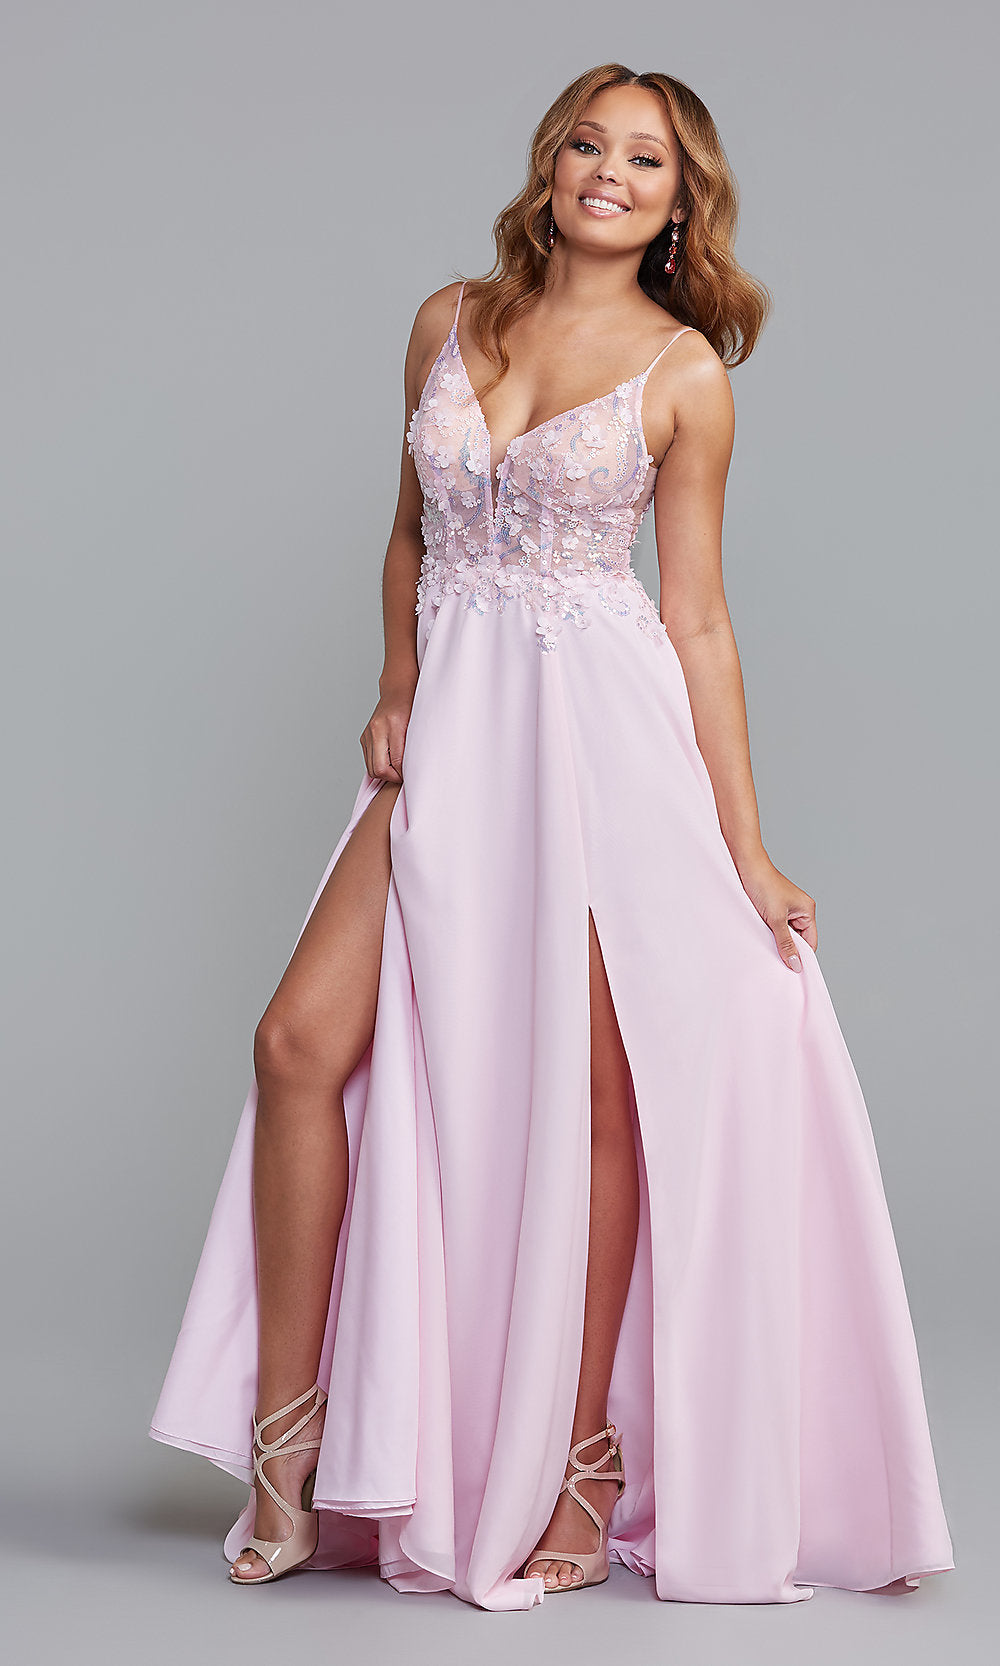 Iridescent Pink Sheer-Bodice Long A-Line Prom Dress with Double Slits